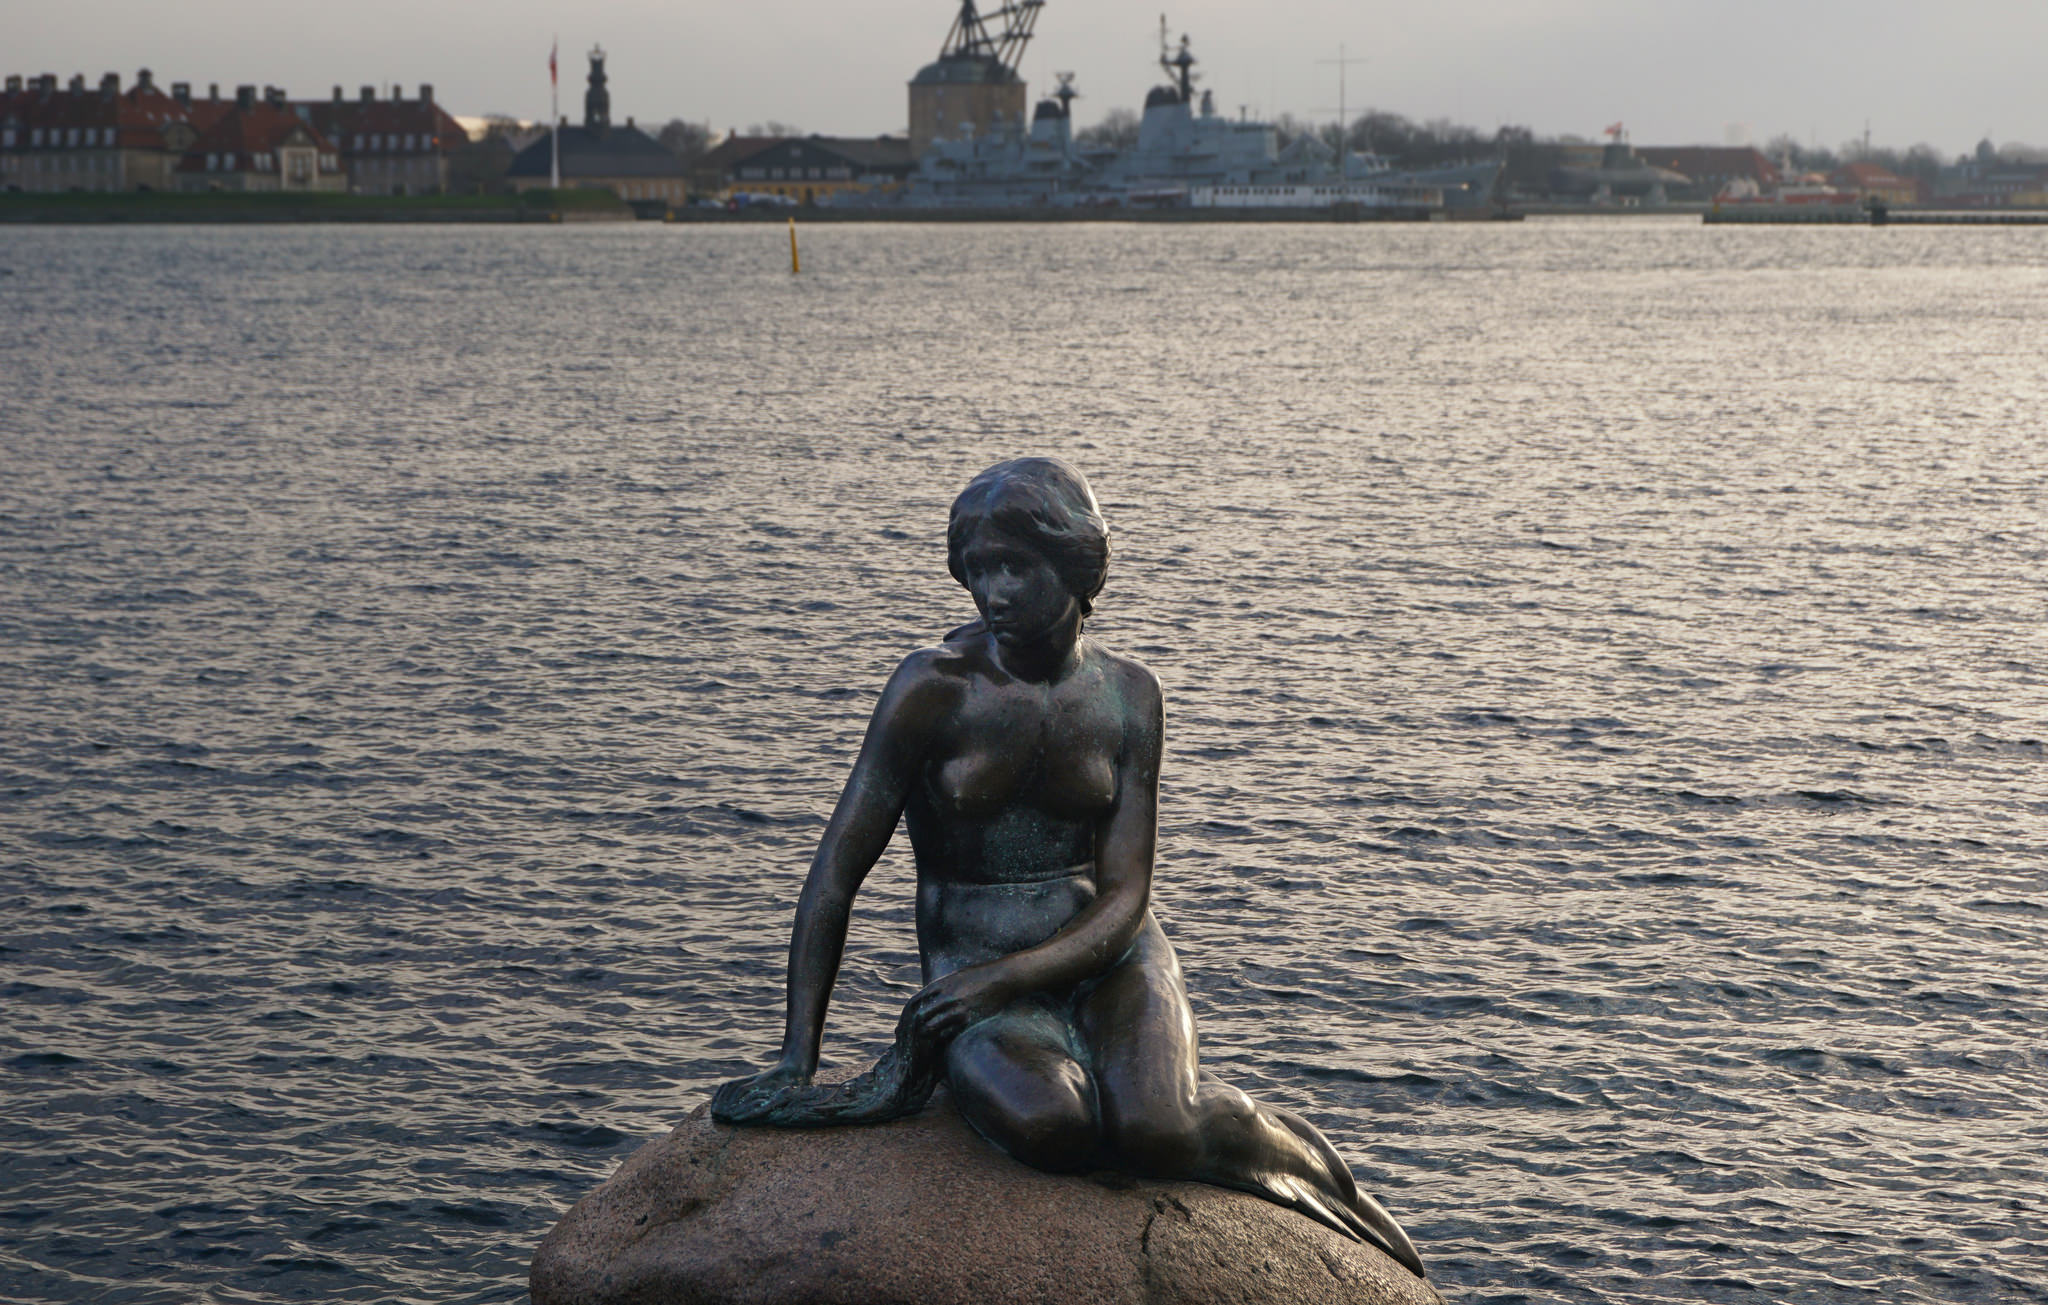 The Little Mermaid, Copenhagen. We nearly fell in the harbour trying to get this picture.